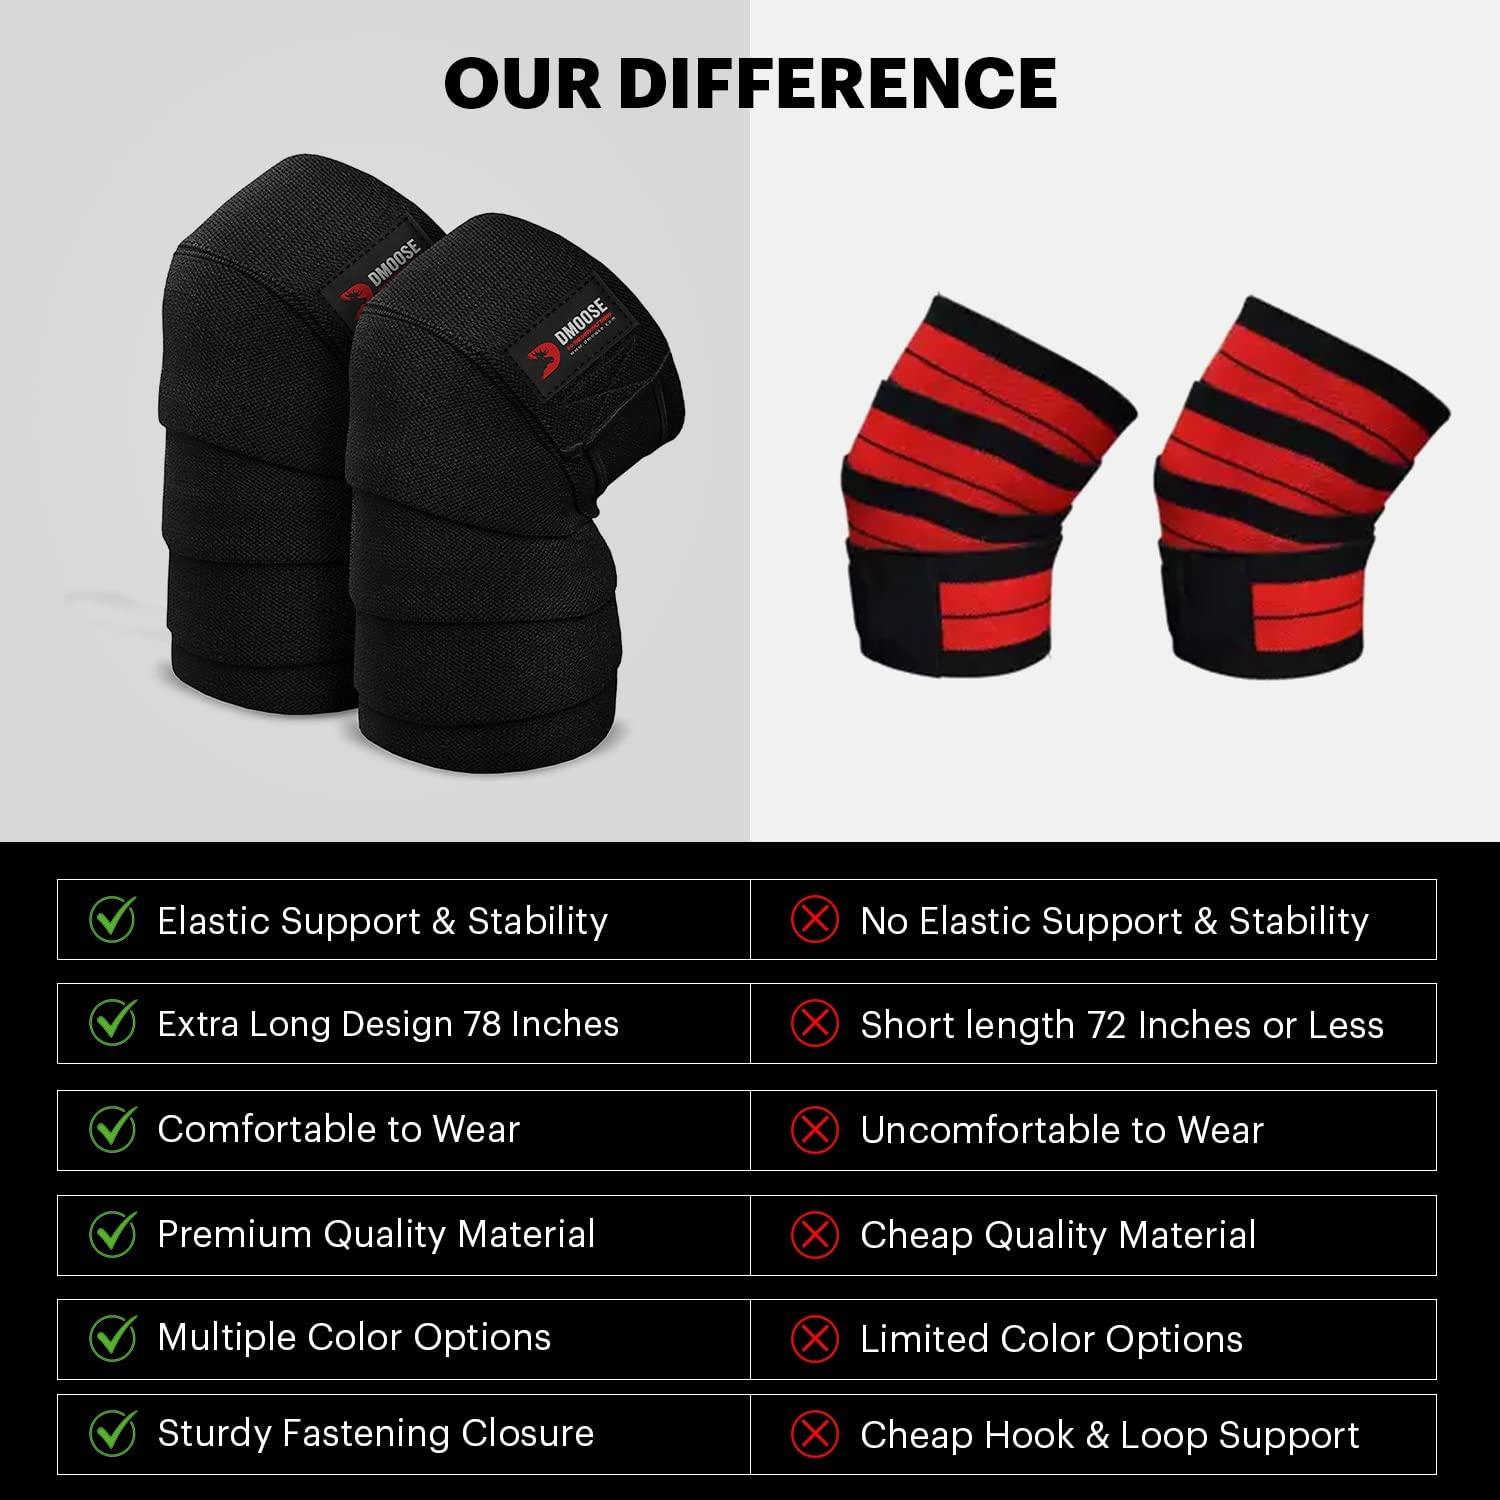 Upgrade Your Workout with DMoose Weightlifting Knee Sleeves